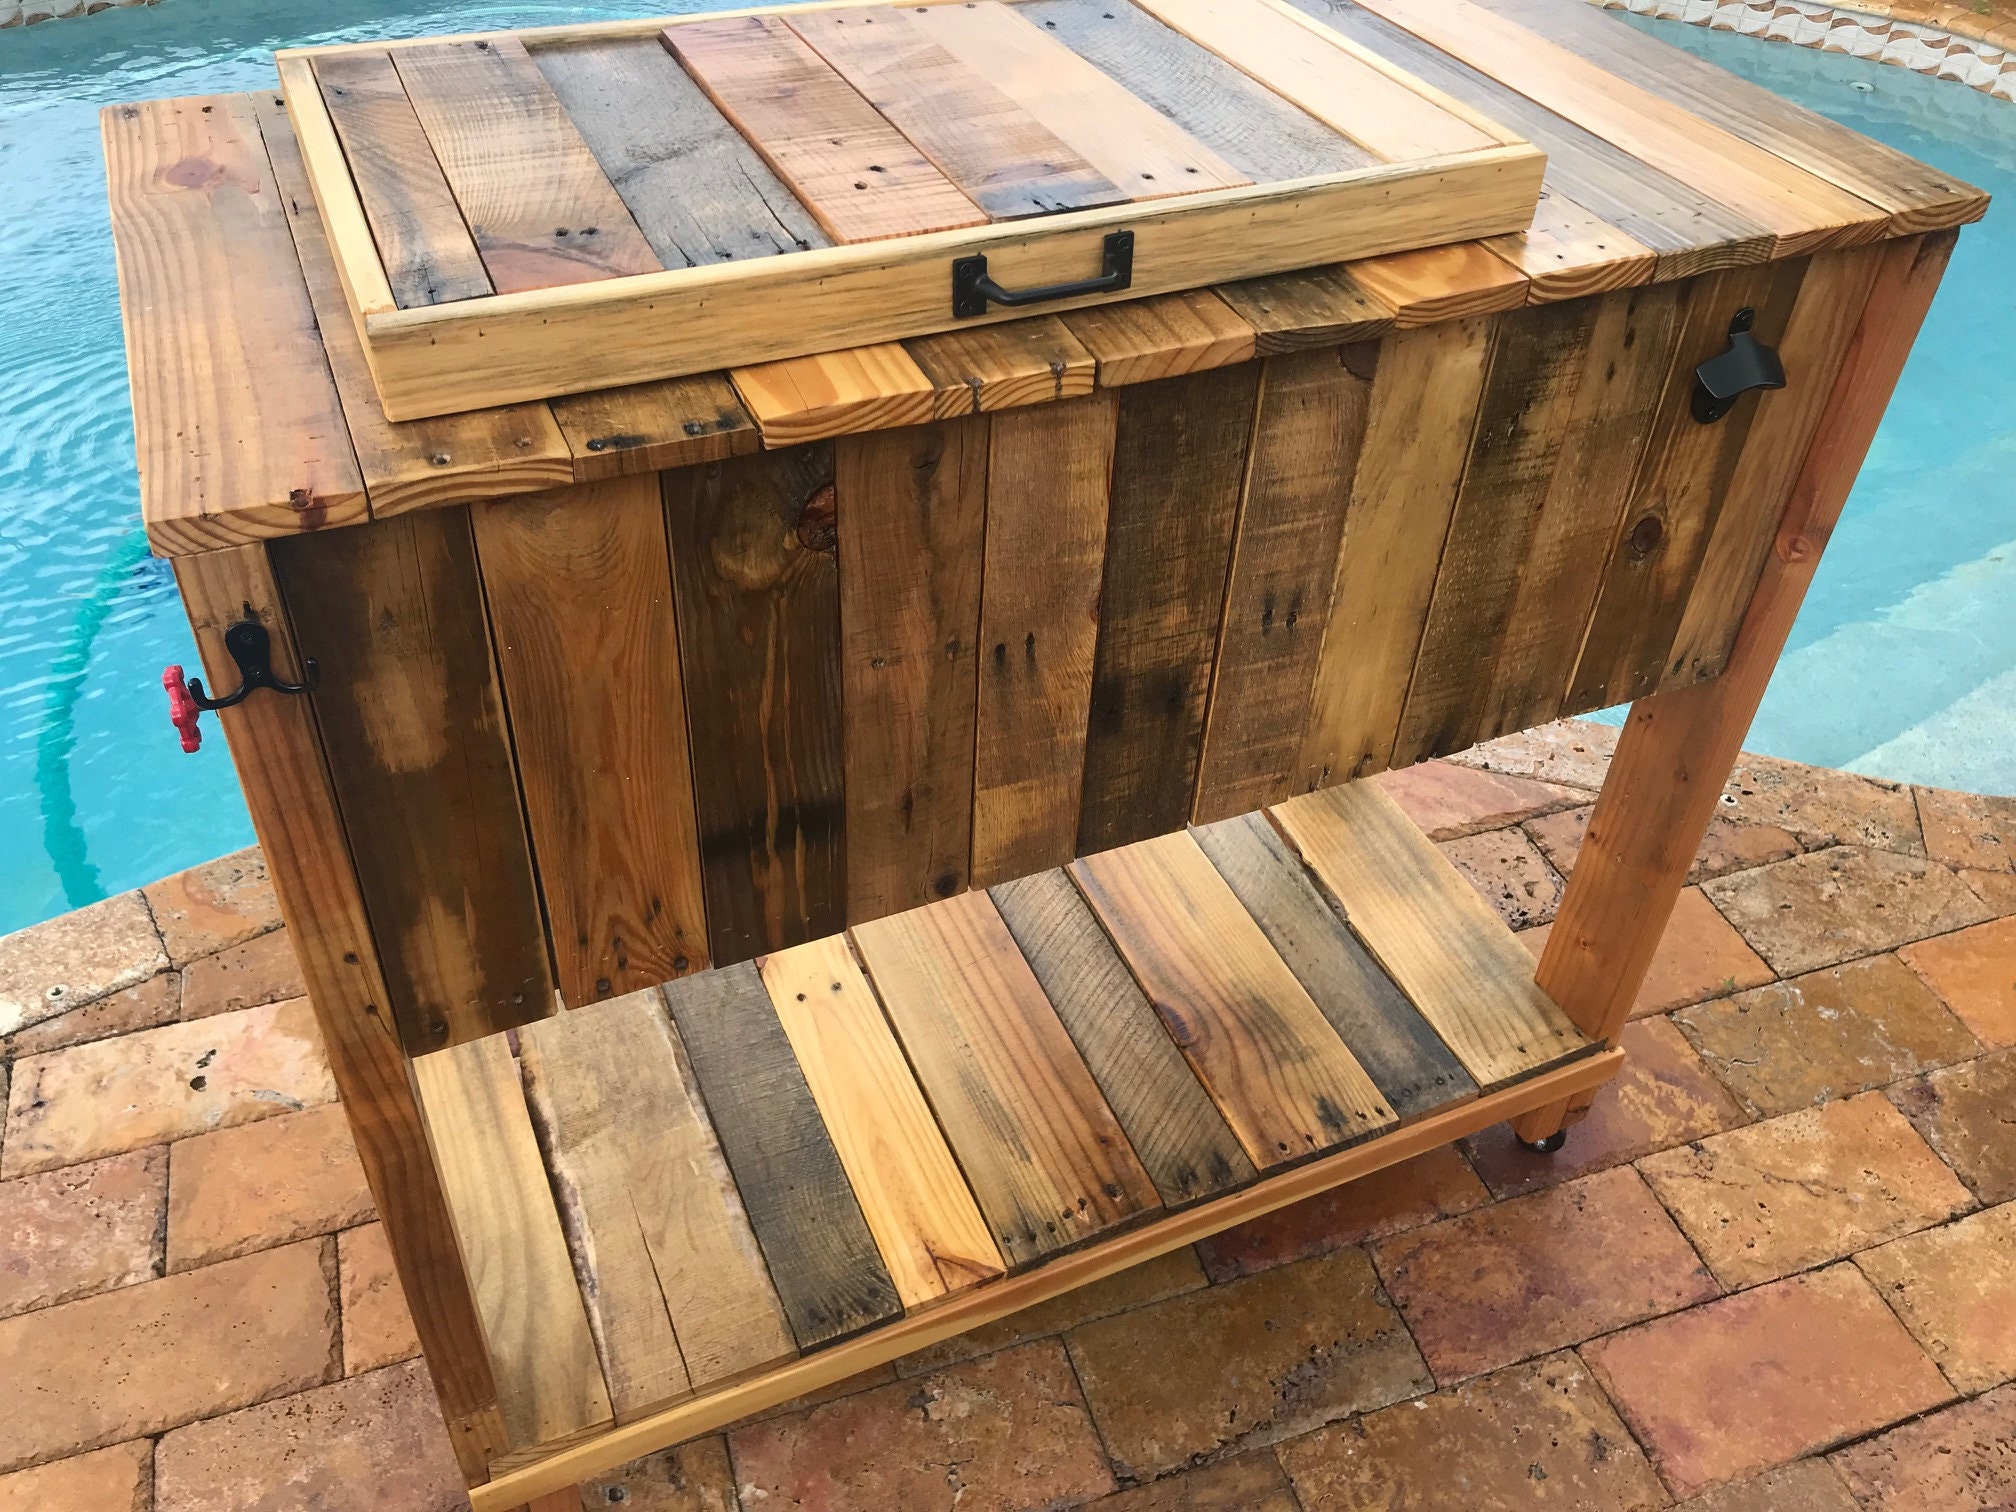 Wooden and Foam Rustic Beer Cooler Box Mexican Handcrafted Beer